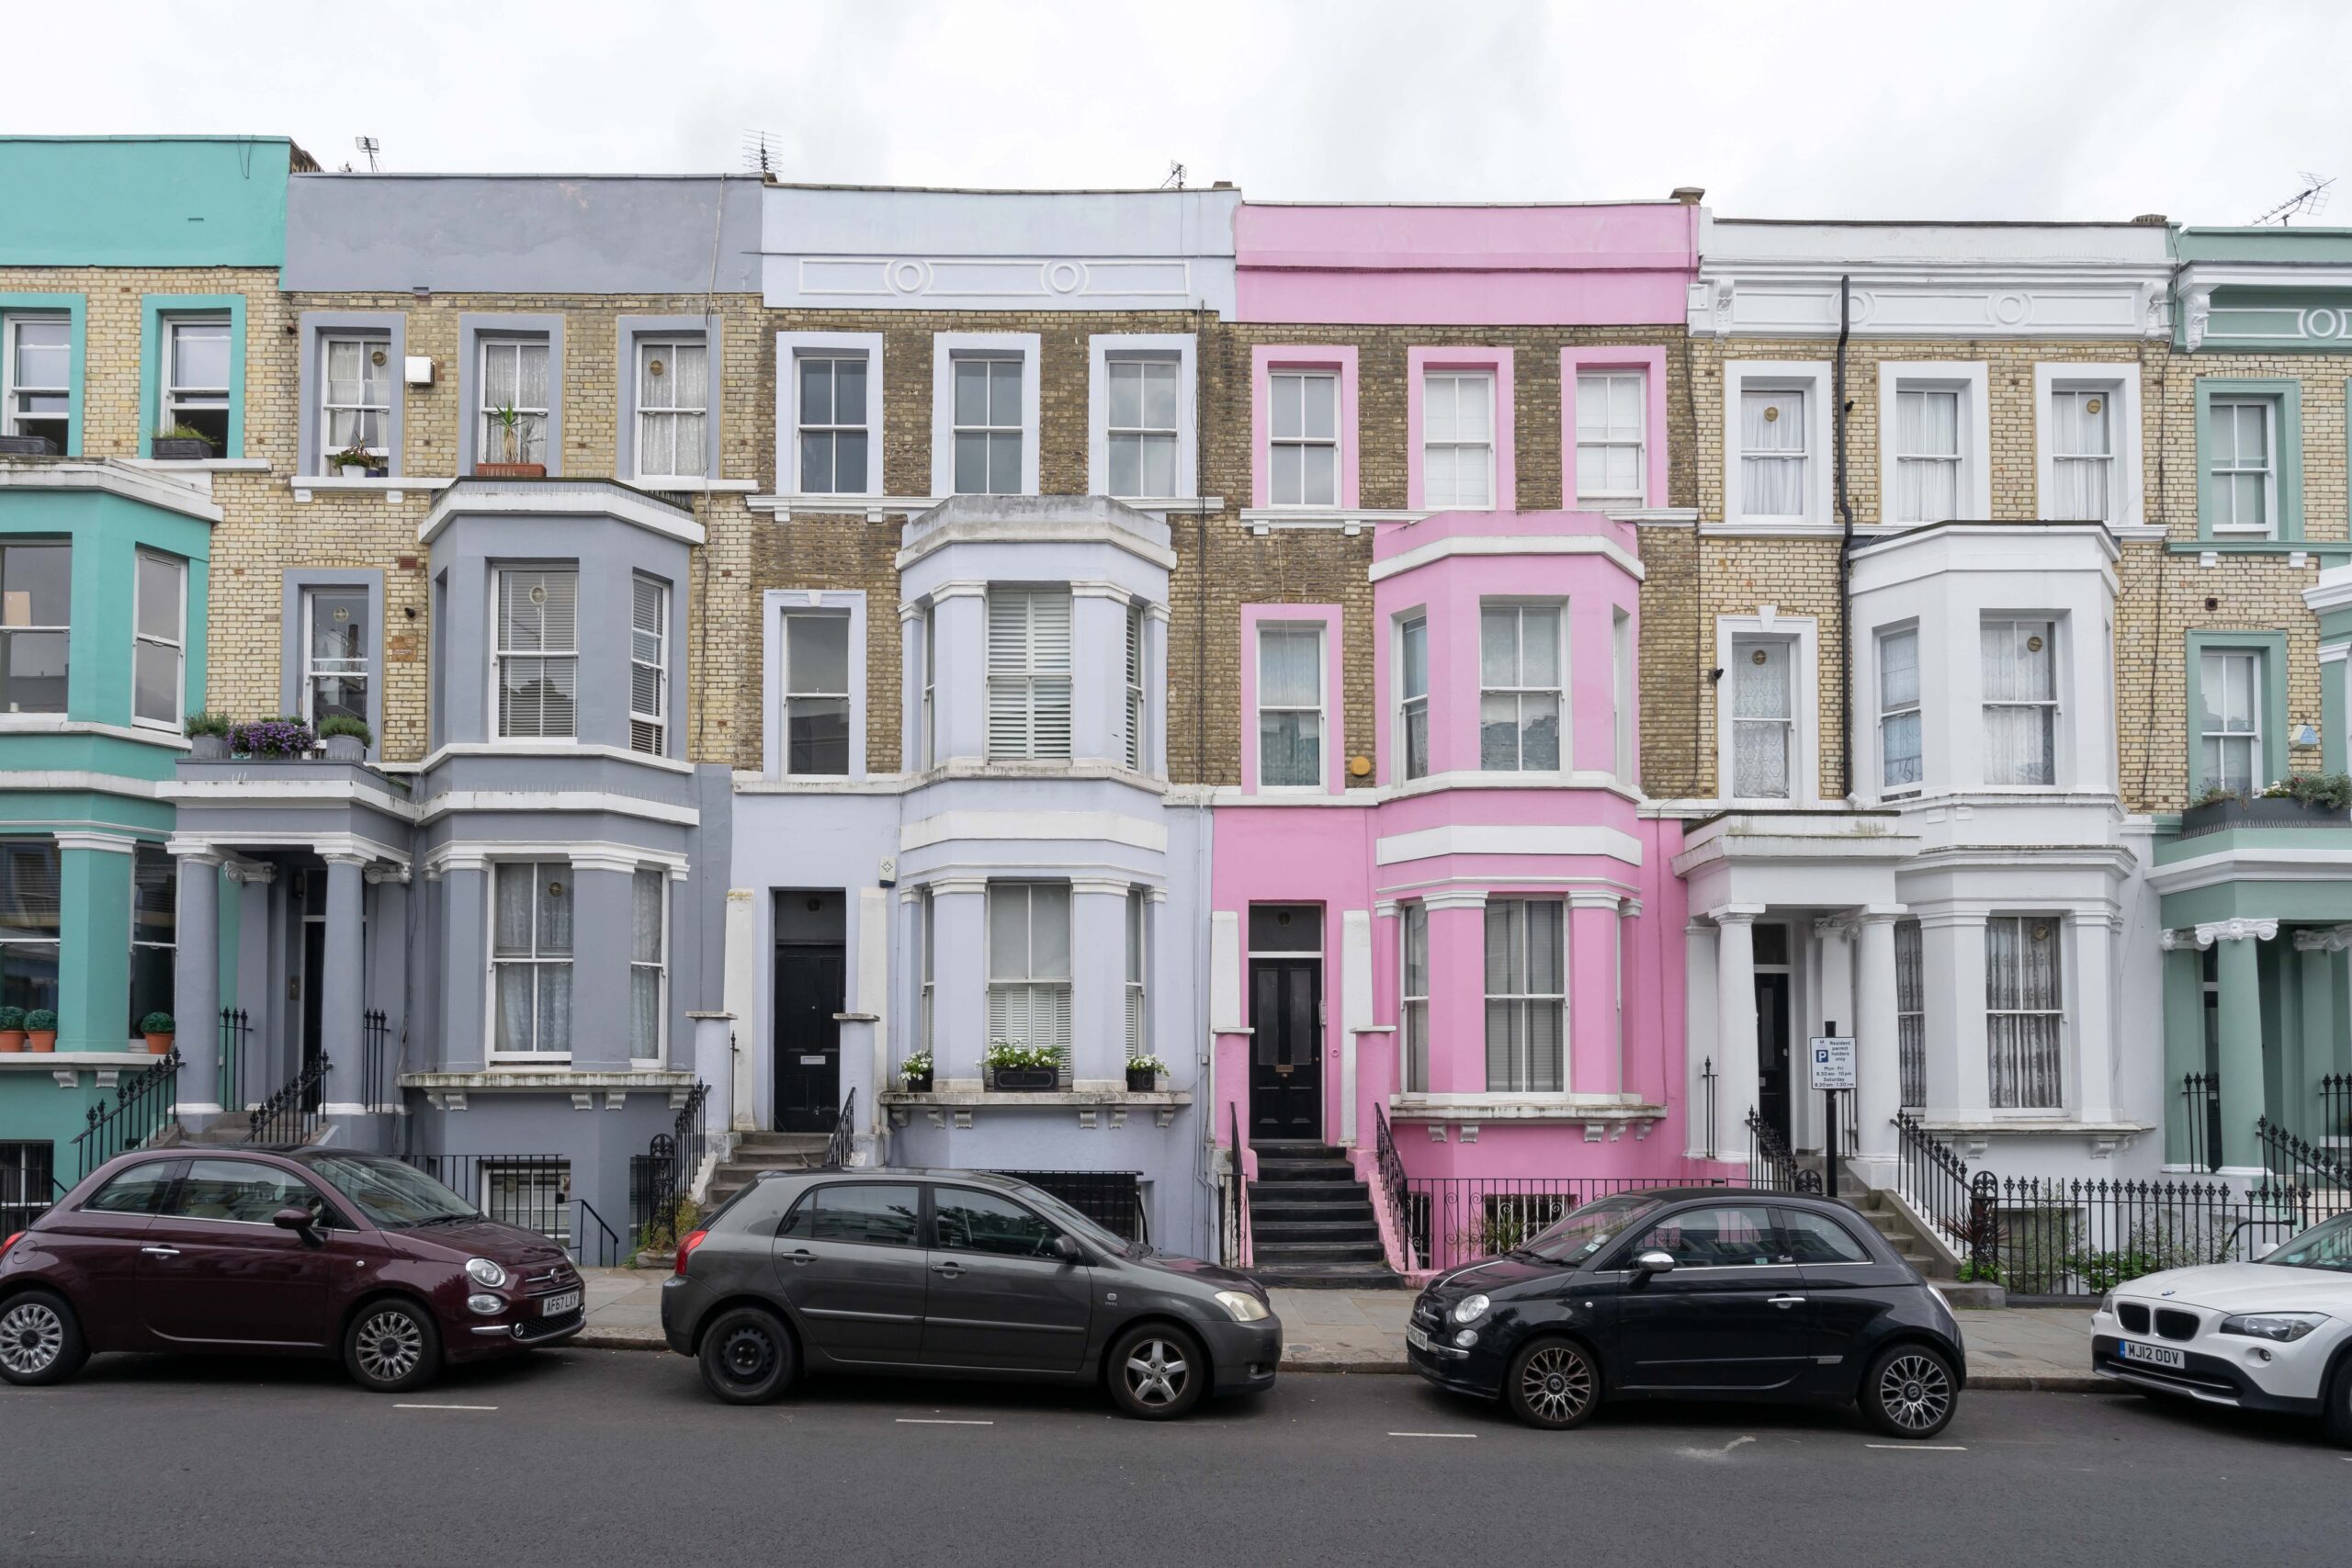 For Sale: Westbourne Park Road Notting Hill candy-coloured stucco townhouses